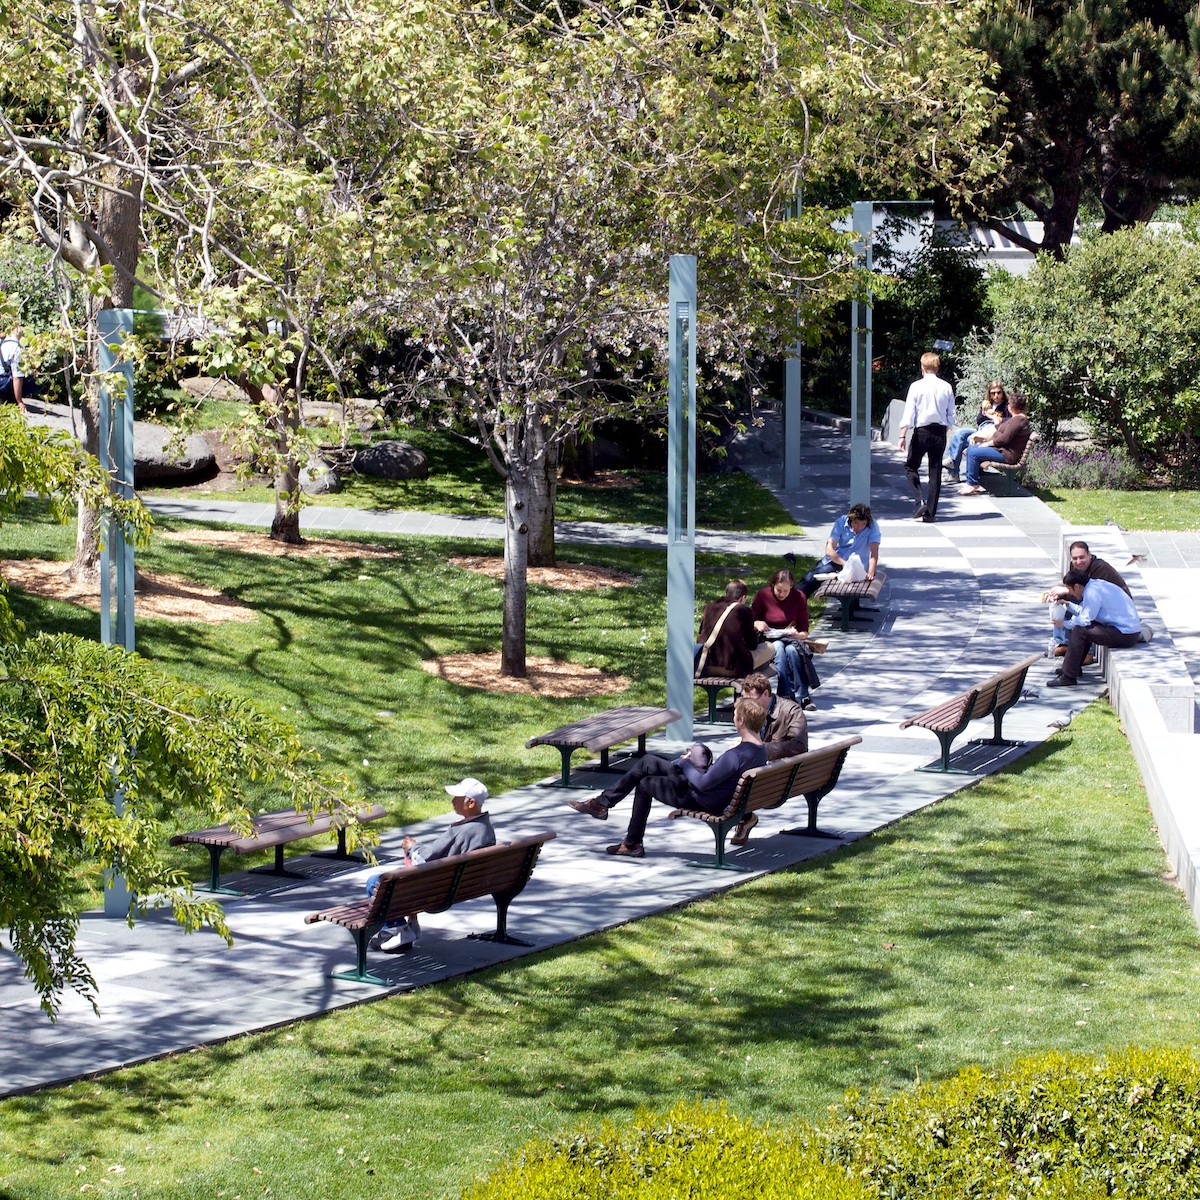 A walking path lined with people sitting on benches in the Yerba Buena Gardens in San Francisco